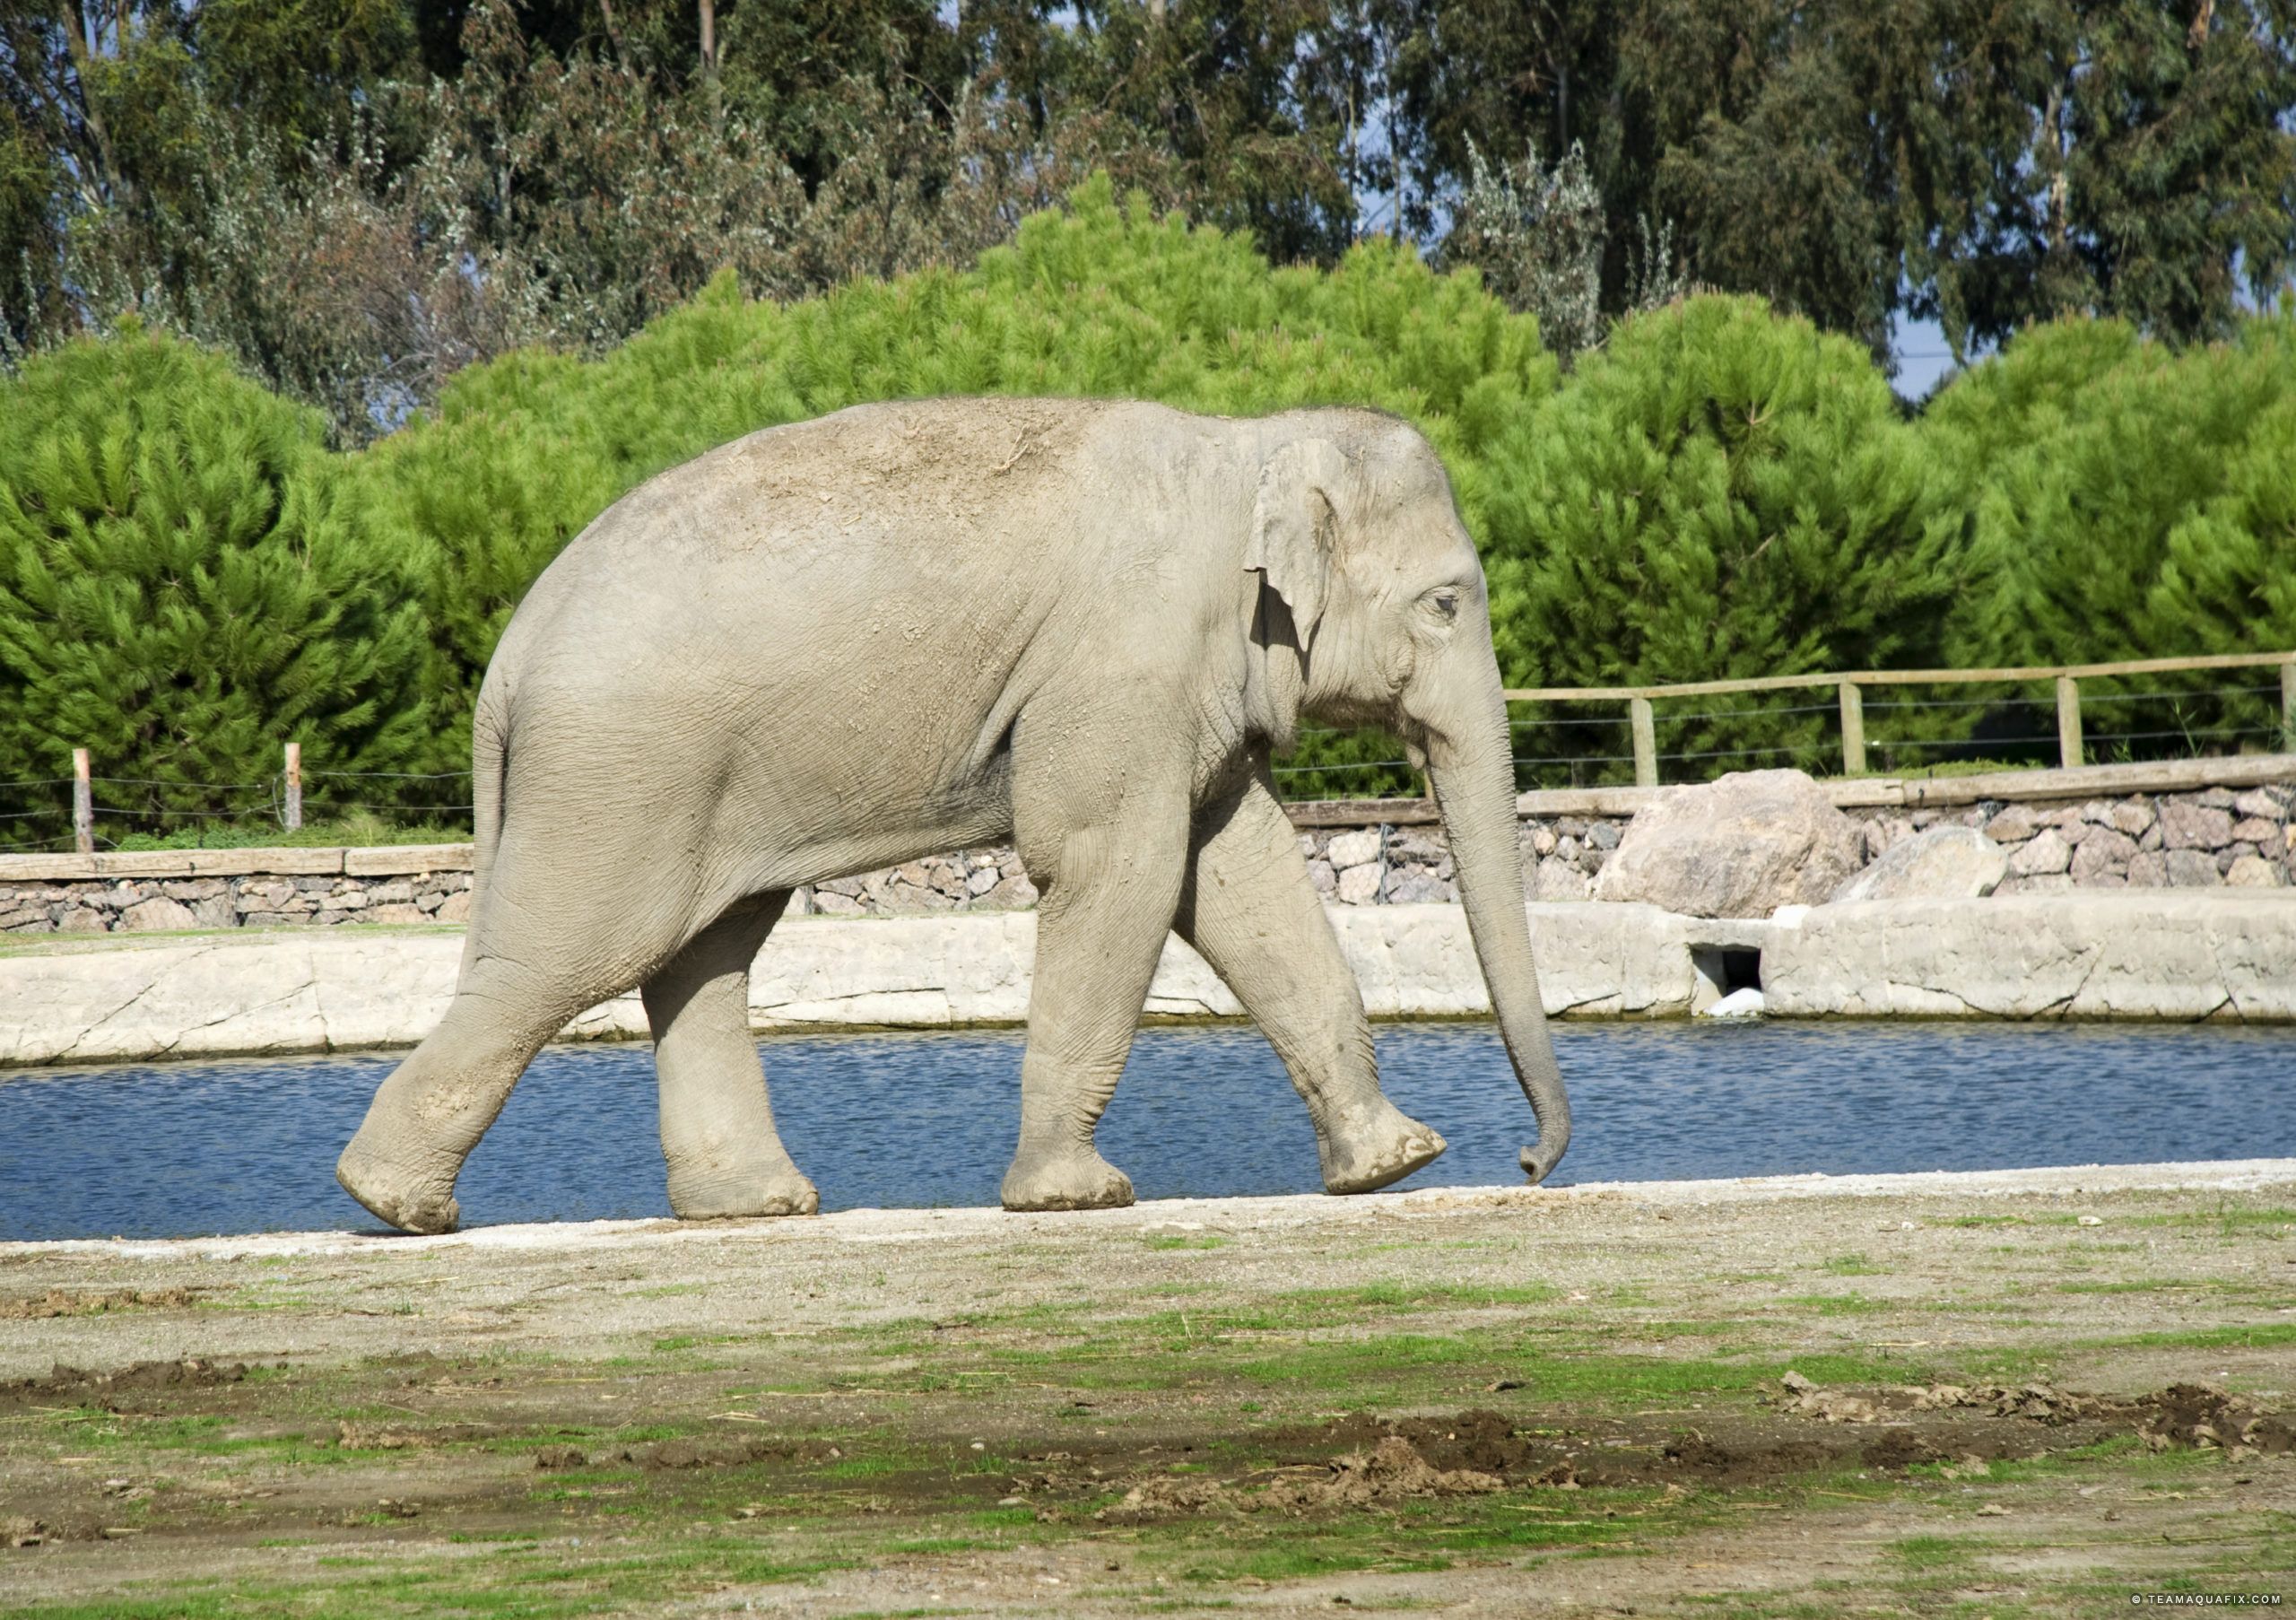 Sludge Reduction in Elephant Watering Hole – Unique Application